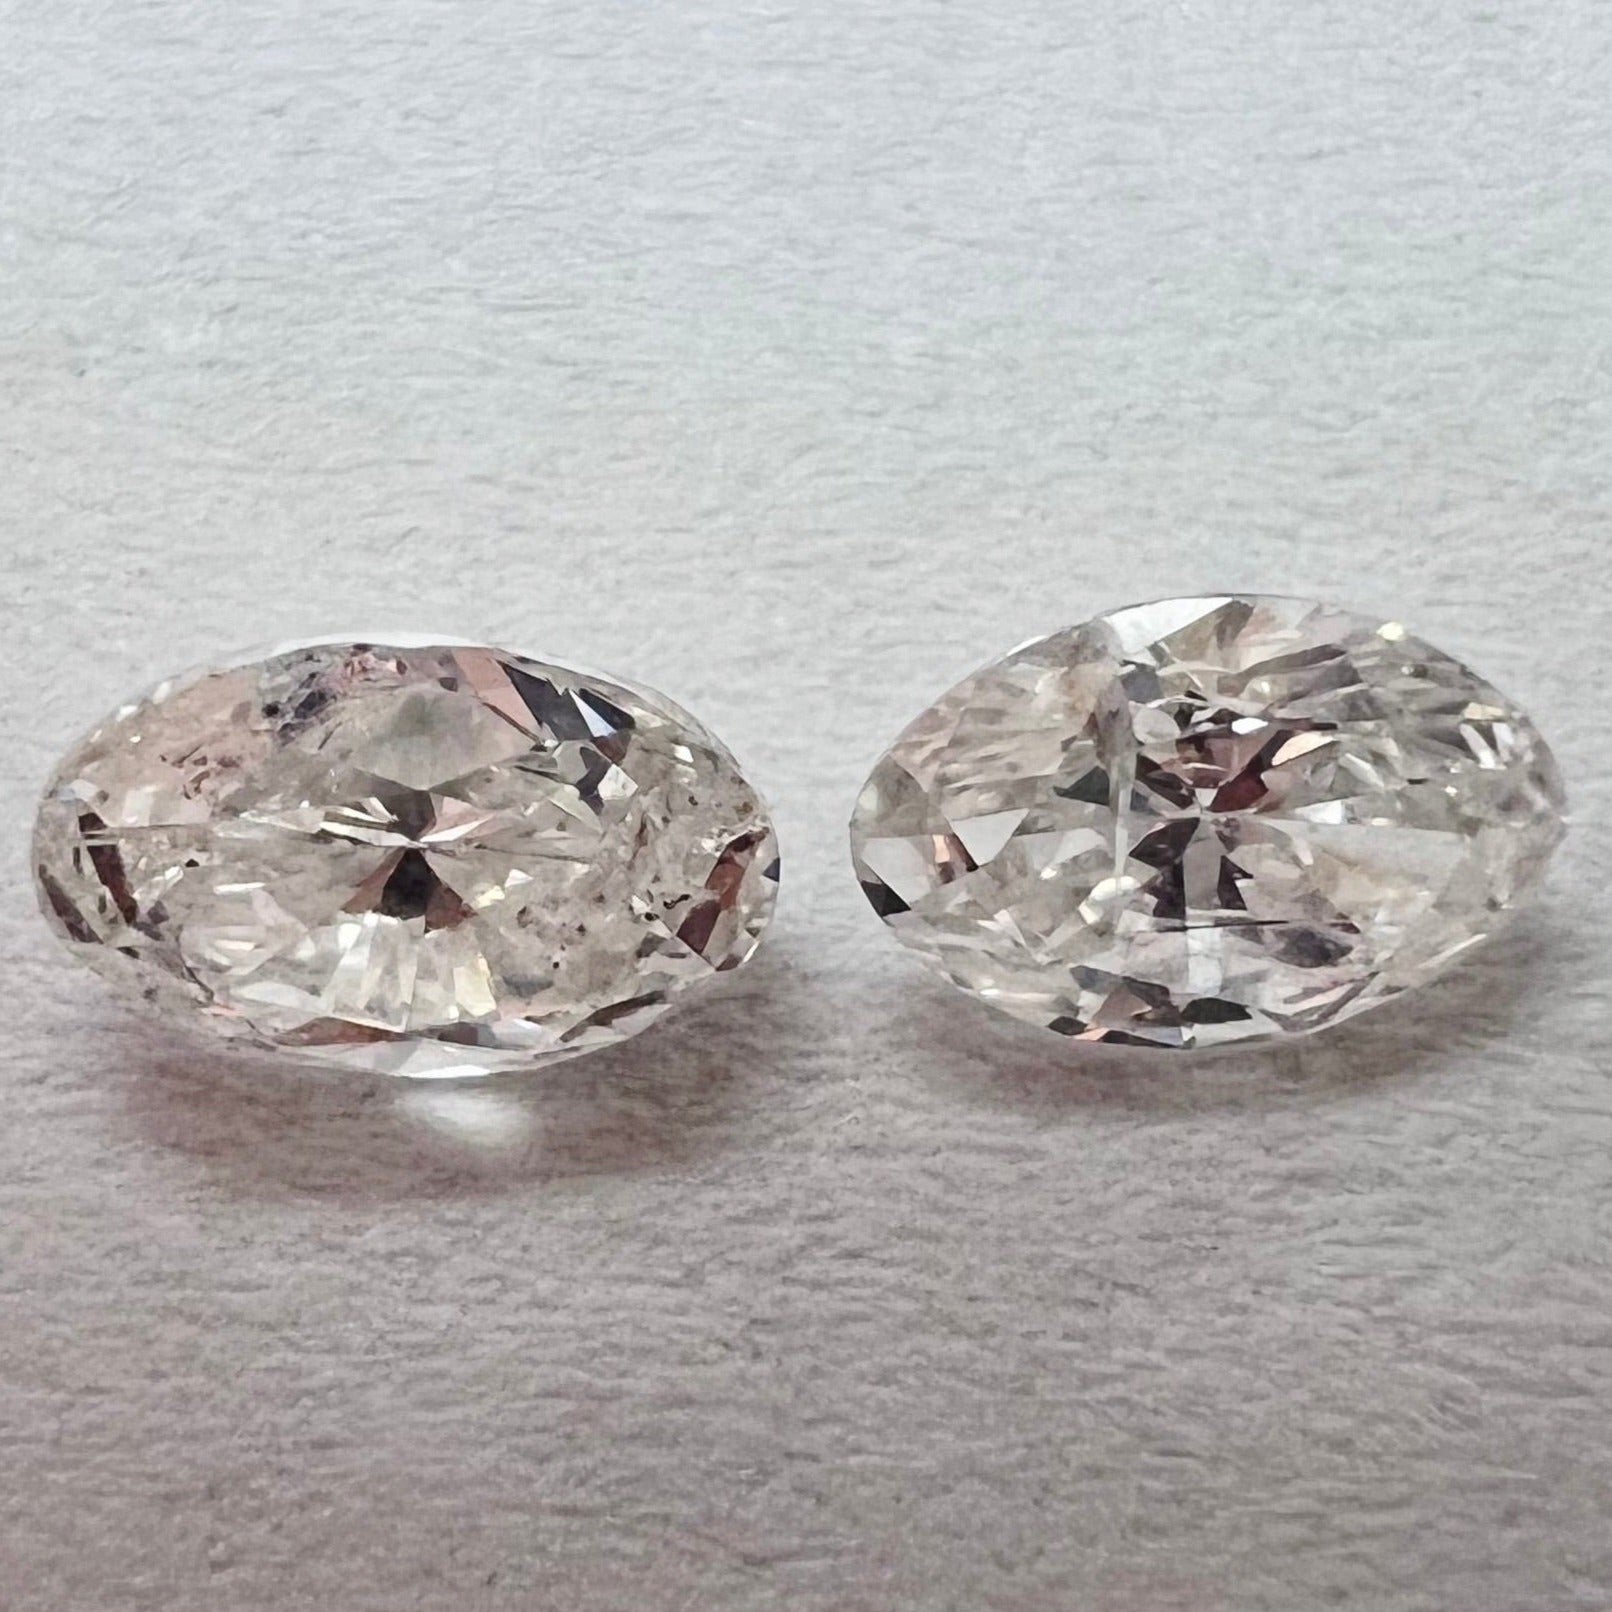 .59CTW Pair of Natural Oval Cut Diamonds SI2 K-M Natural and Earth mined